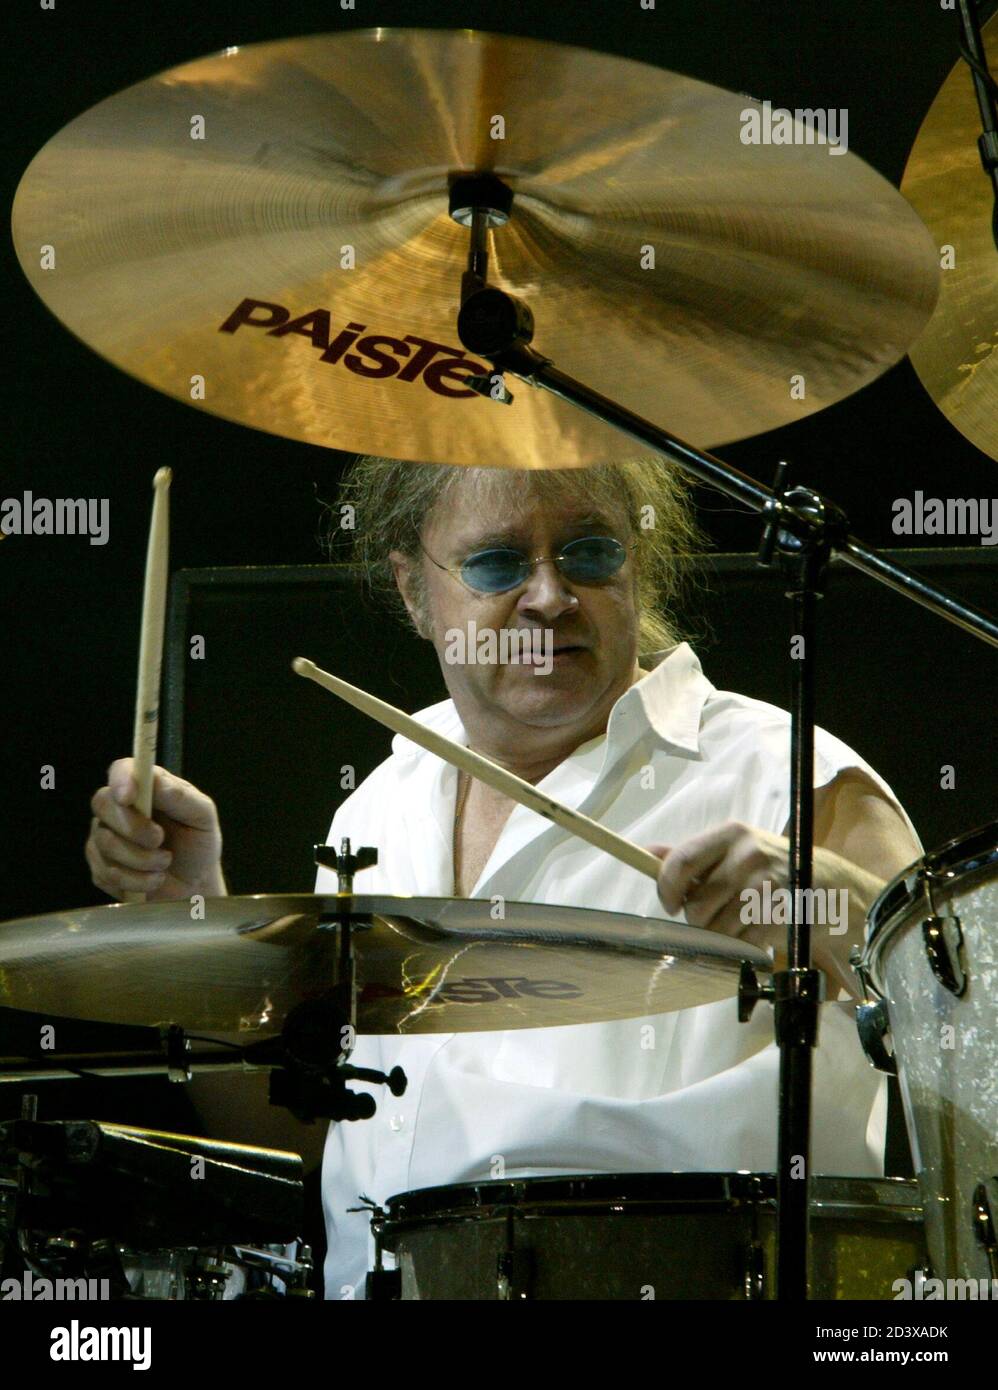 British rock band Deep Purple drummer Ian Paice performs during a concert  at Shanghai Grand Stage April 2, 2004. [The concert was part of a China  tour which kicked off in Beijing